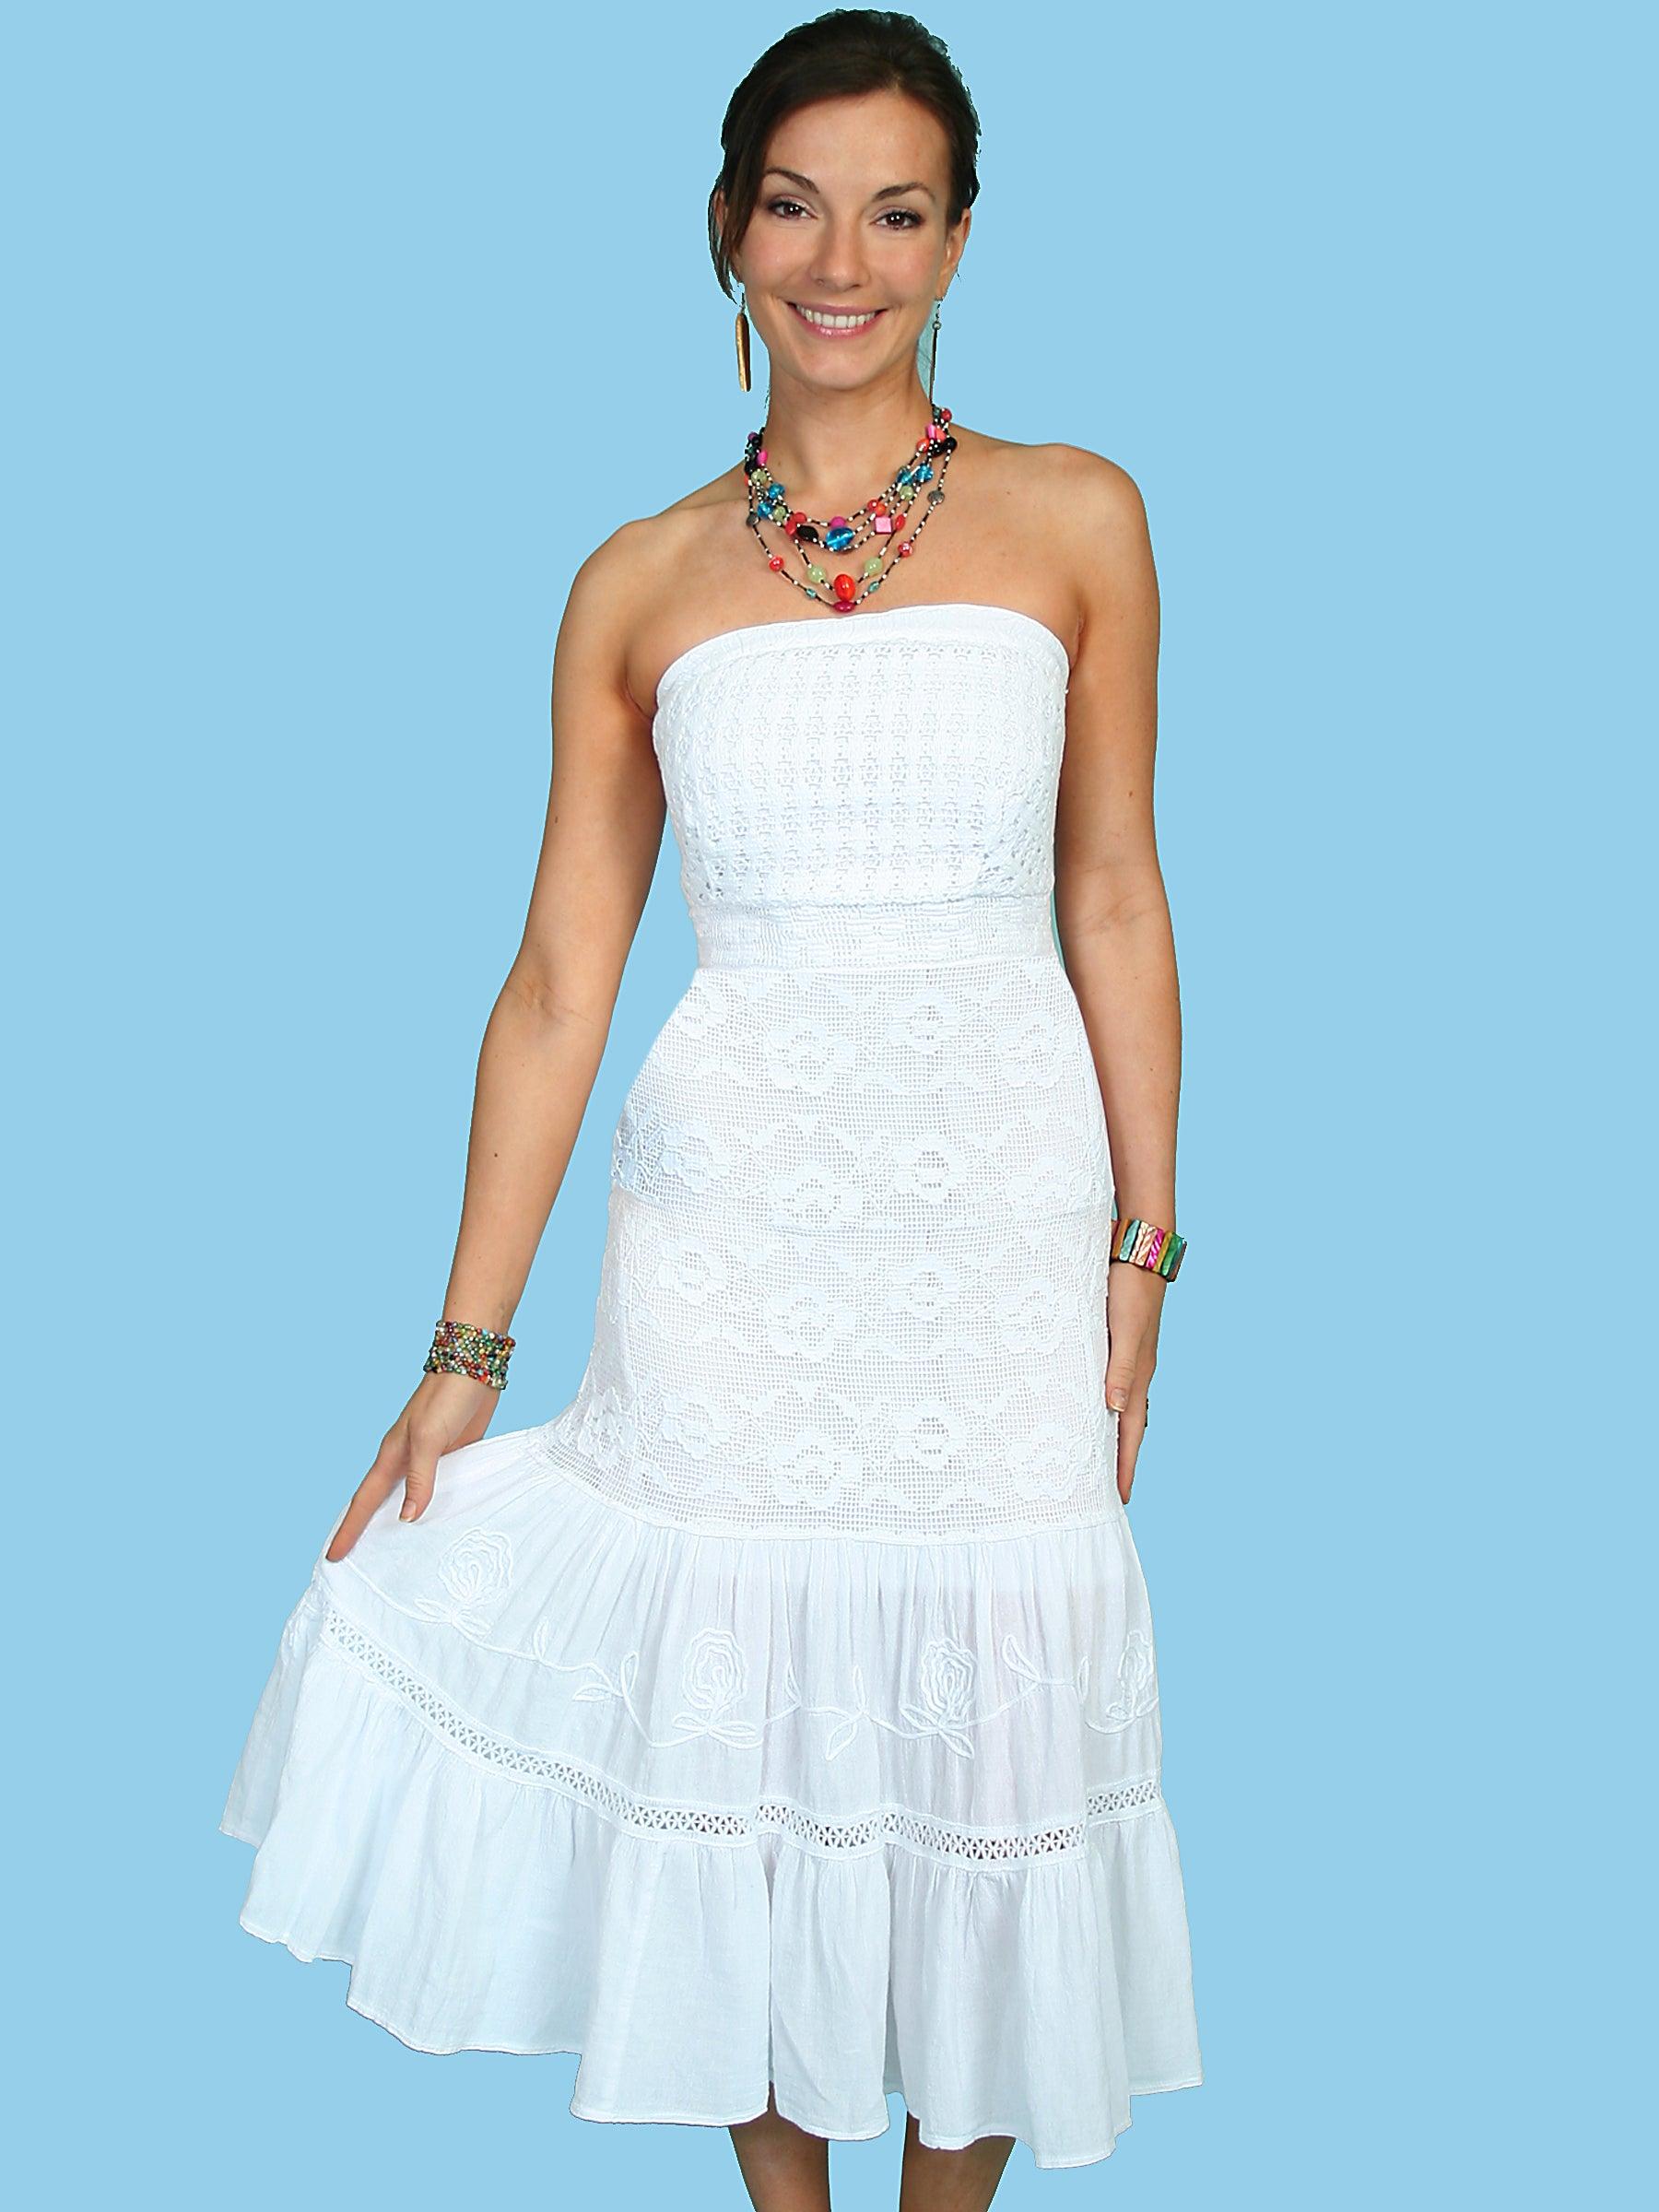 Scully WHITE TUBE TOP DRESS - Flyclothing LLC